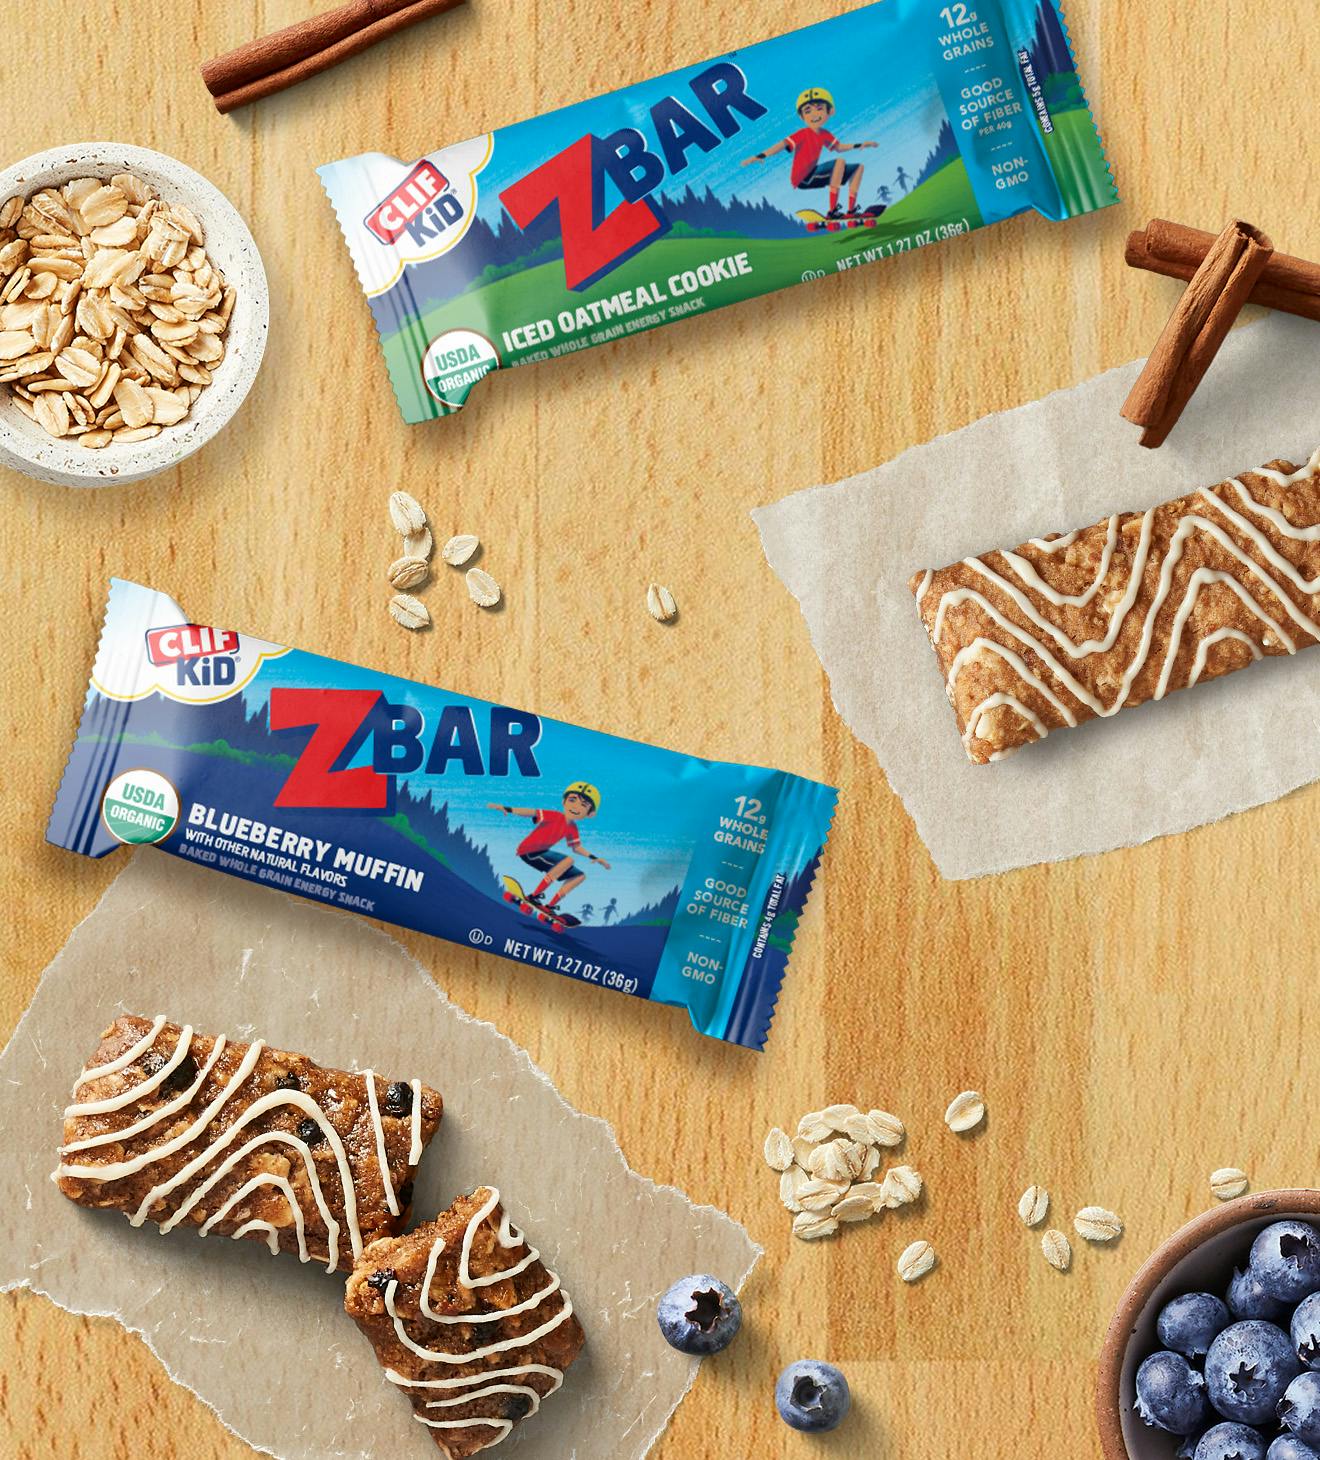 CLIF Kid Zbar Blueberry Muffin and Iced Oatmeal Cookie